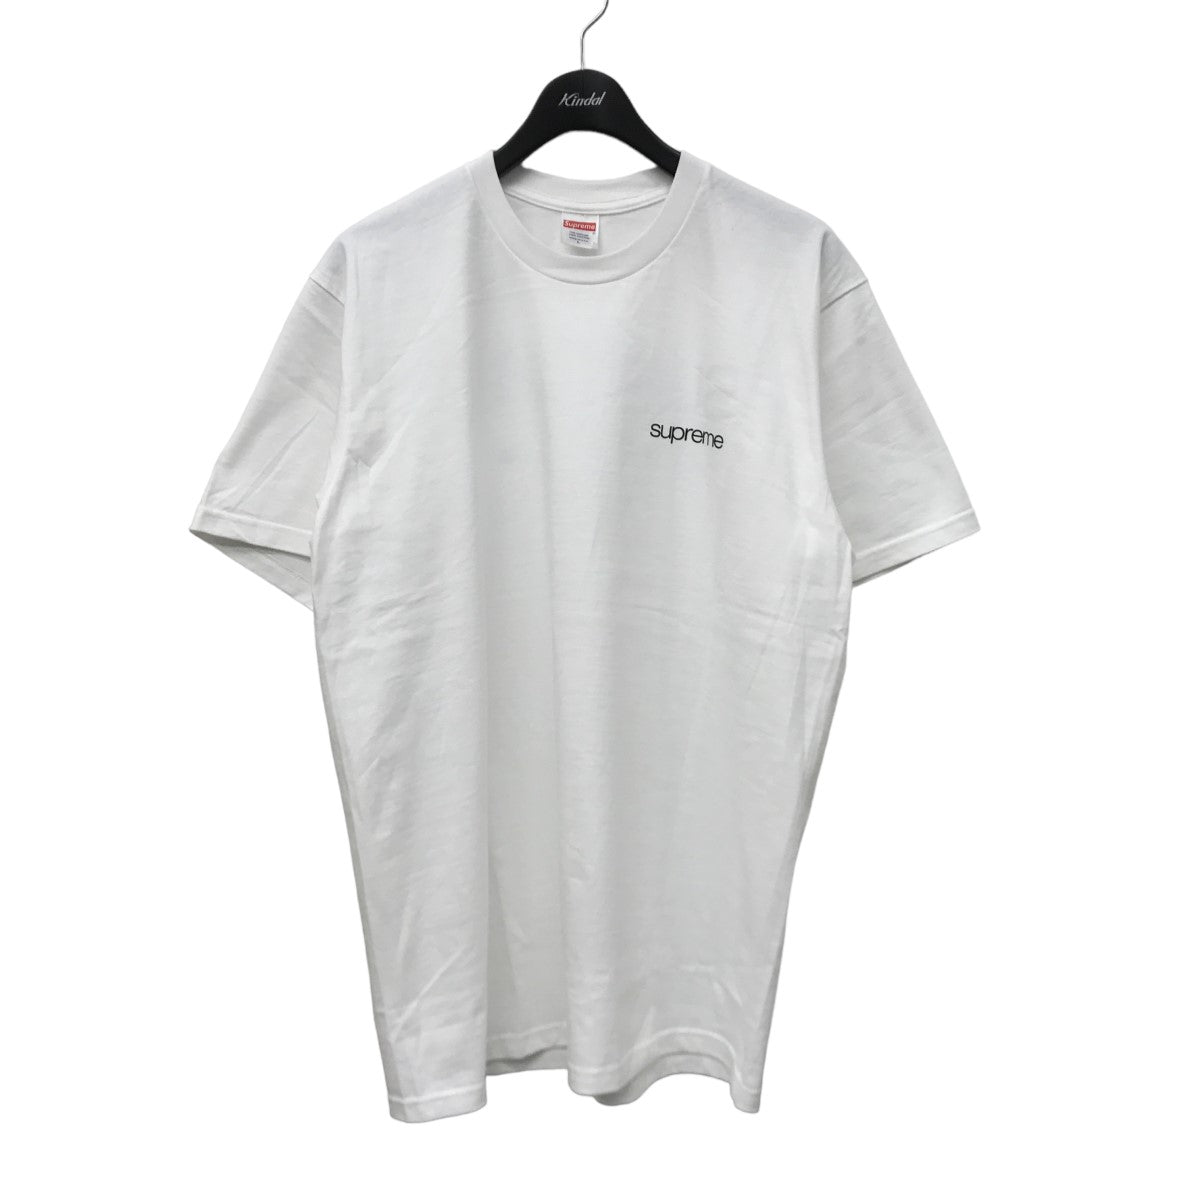 23AW NYC tee プリントTシャツ